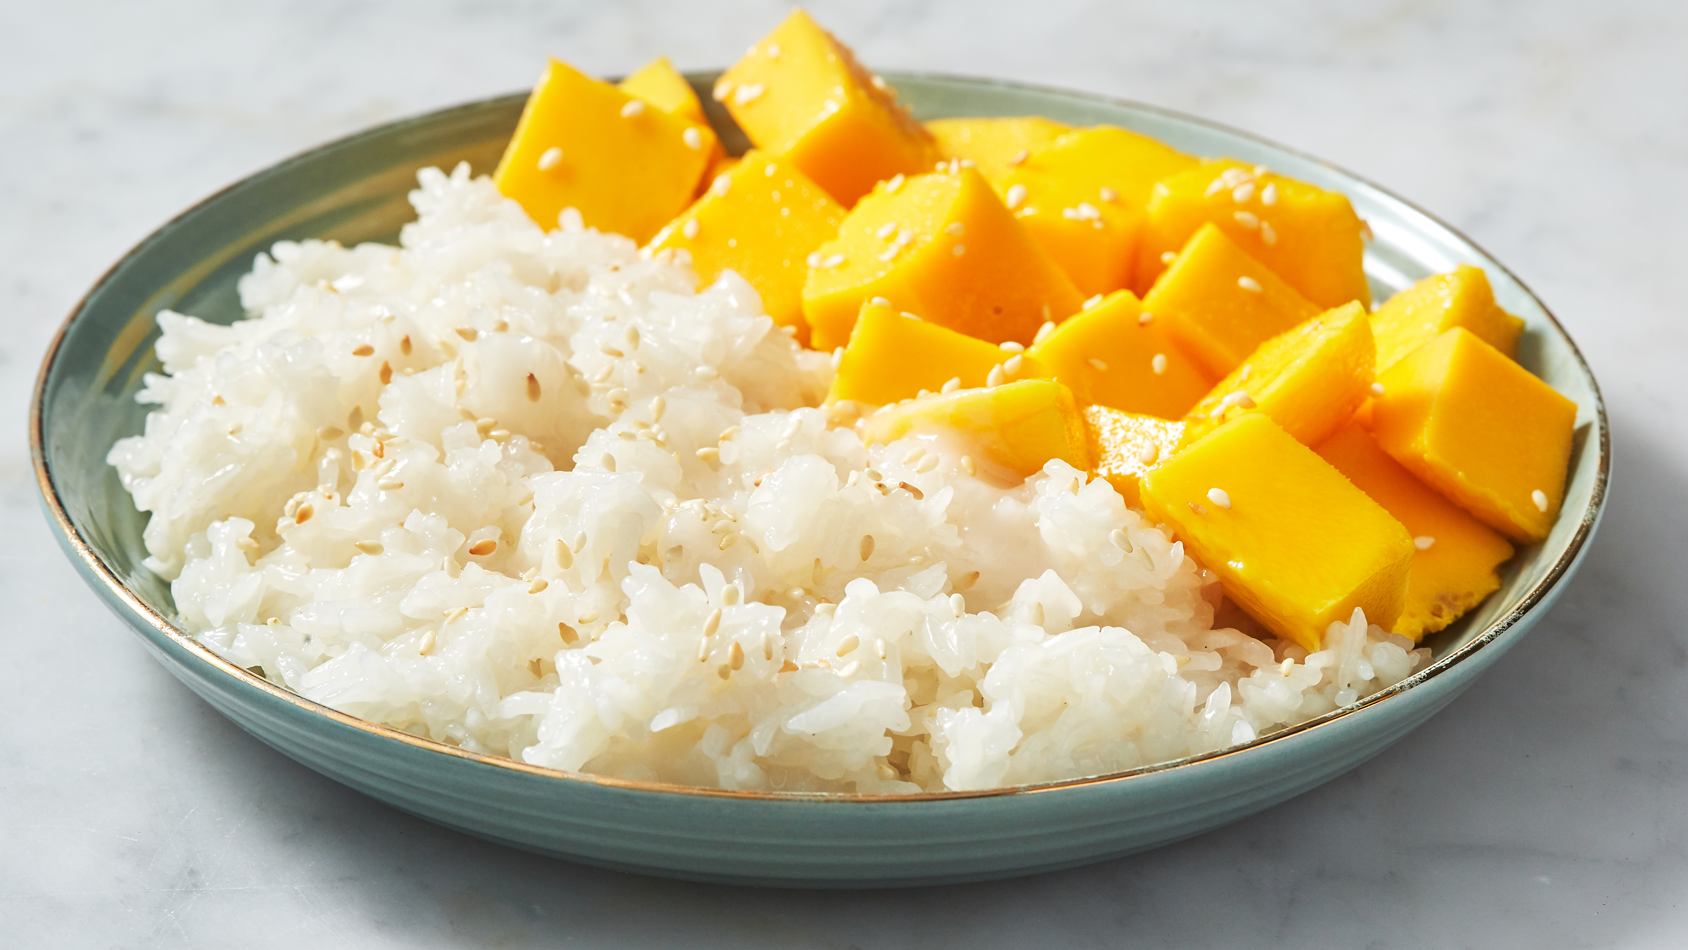 https://hips.hearstapps.com/hmg-prod/images/delish-190618-mango-sticky-rice-255-landscape-pf-1561646936.png?crop=0.888888888888889xw:1xh;center,top